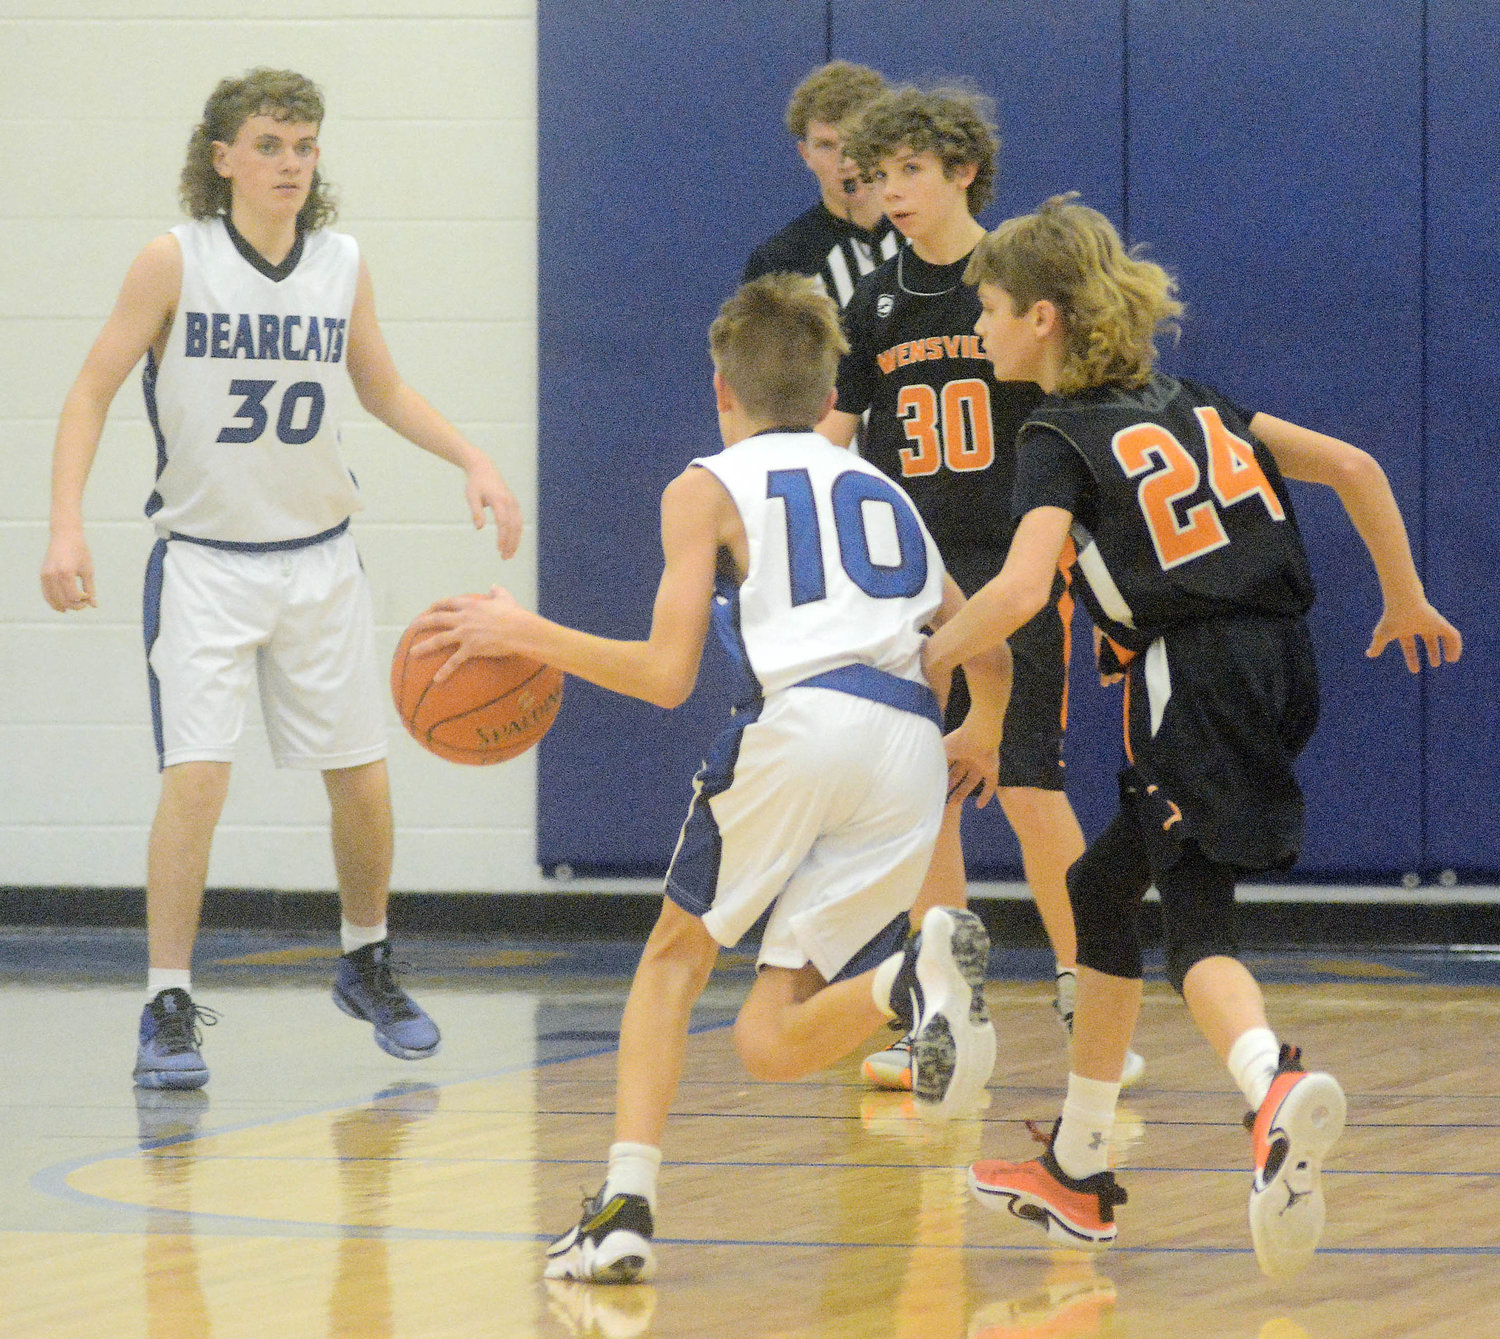 Owensville would win the eighth-grade game 43-14 before also winning the seventh-grade game 12-8 in overtime.